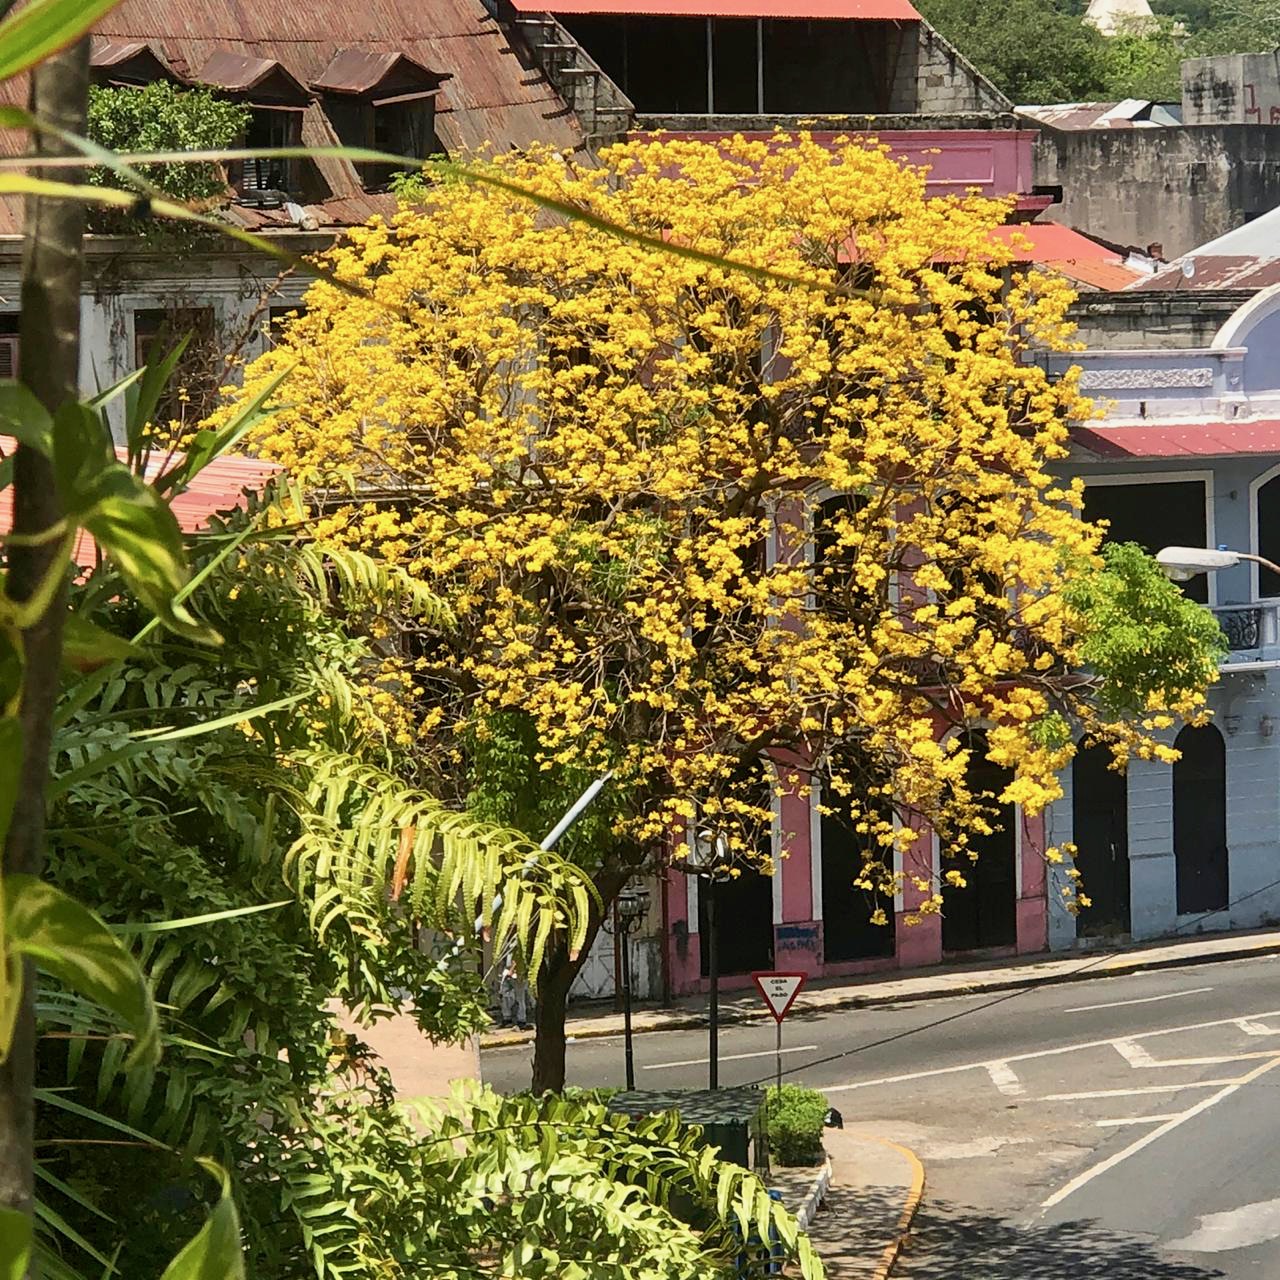 Guayacanes in Panama usually bloom in March